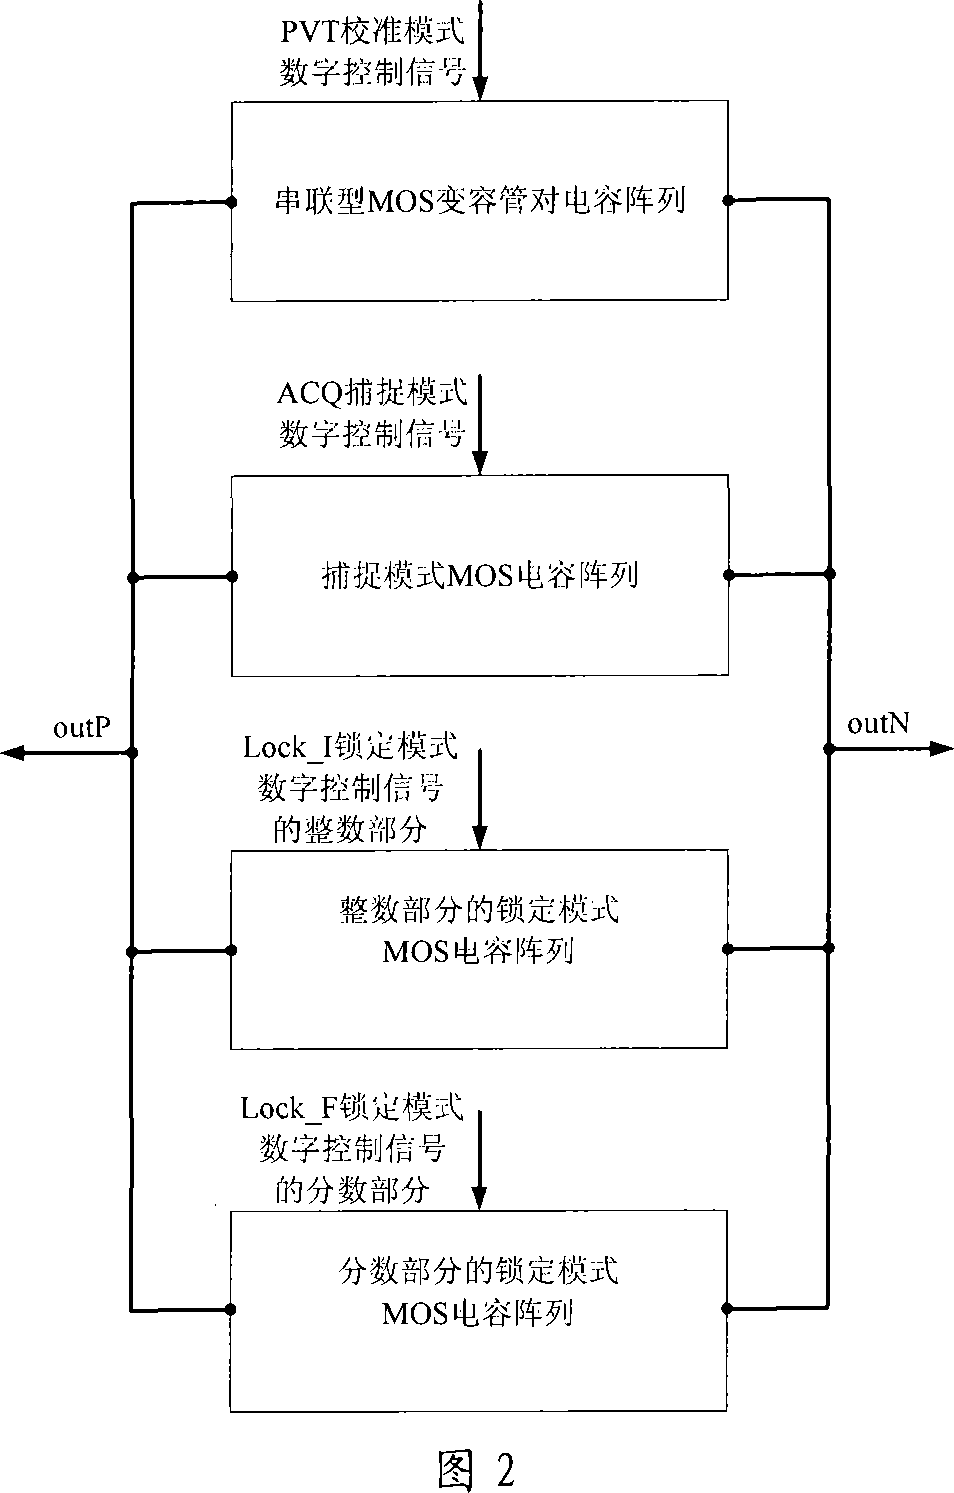 Low-noise digital control LC oscillator using the back-to-back serial MOS varactor